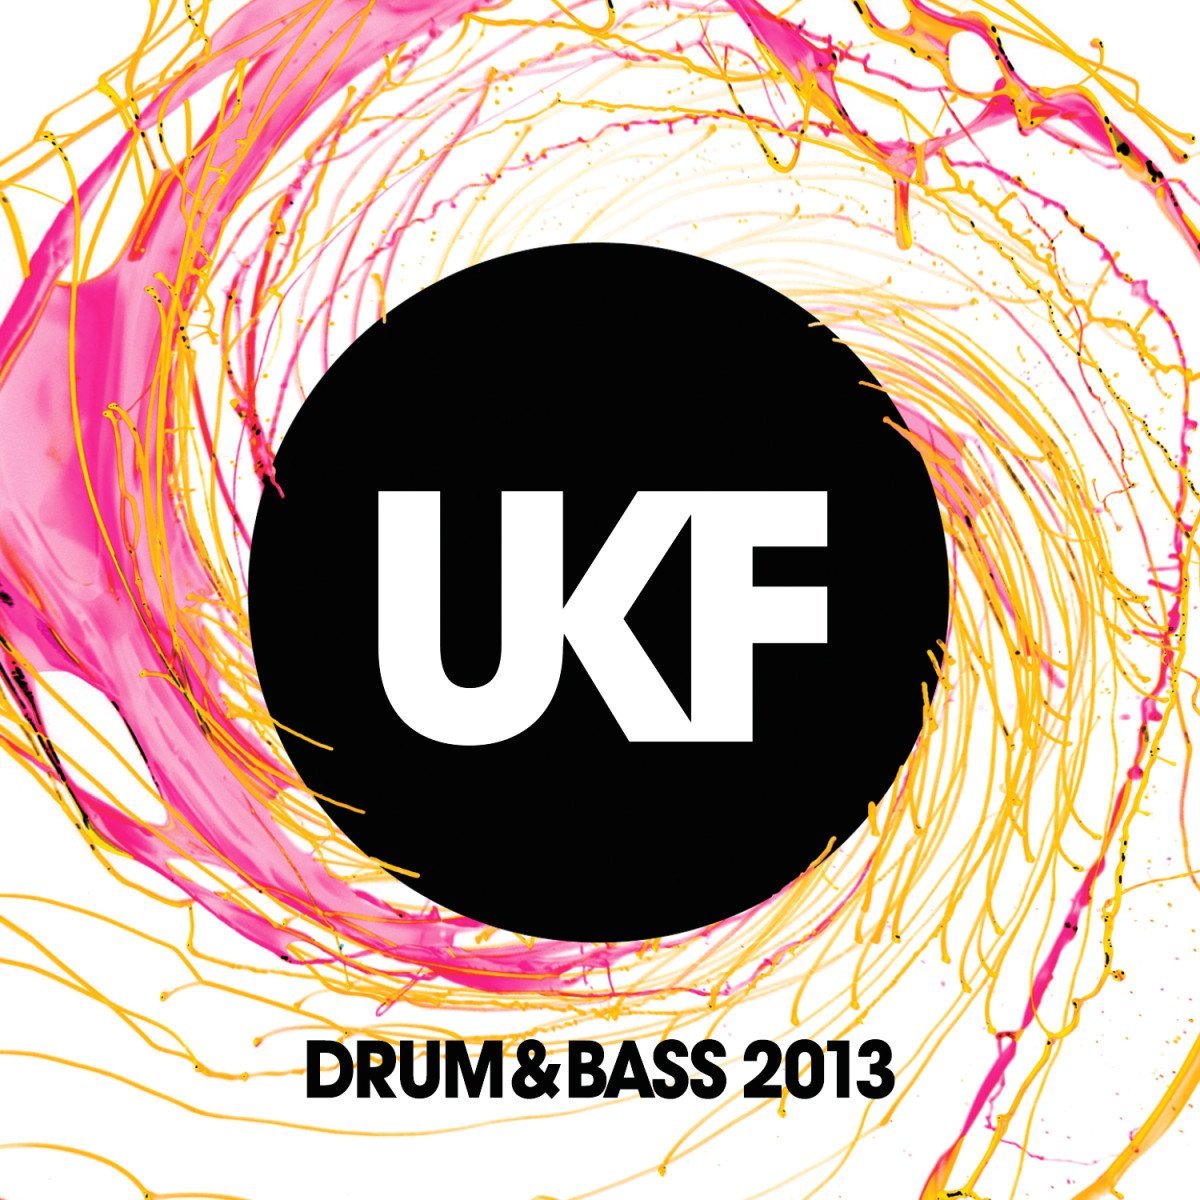 News Added Nov 21, 2013 UKF keep their yearly tradition of releasing a compilation album filled with the latest and greatest drum and bass tracks of the year. No word on a track list yet, but I aim to keep this up to date. UPDATE1: Tracklist added UPDATE2: Release date moved forward, digital release out […]